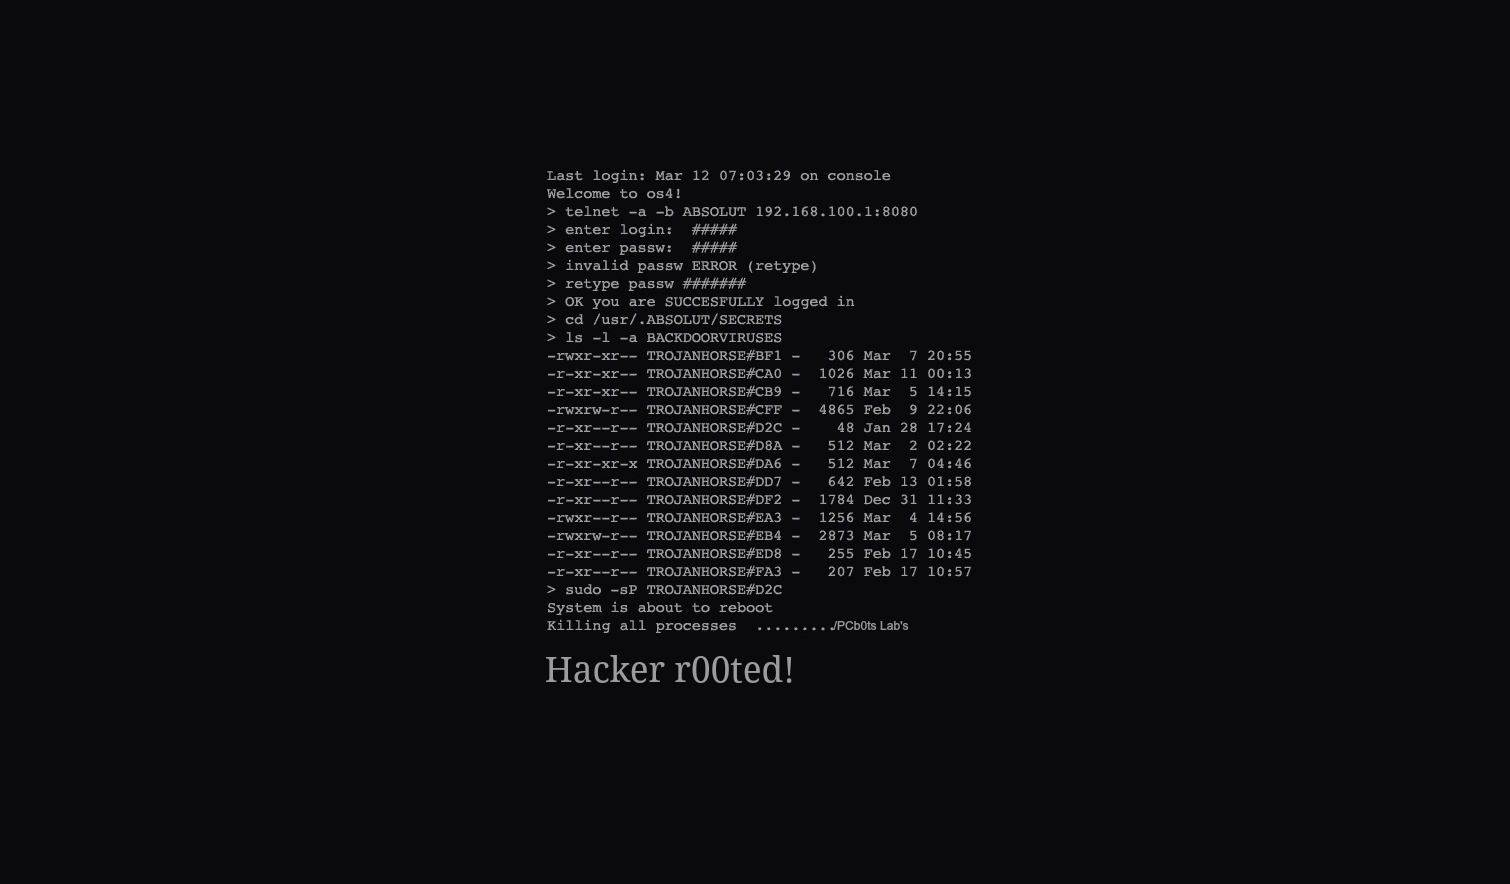 Best HD Hackers Wallpapers Part VI - Wanna Be hacker | Tricks and ...